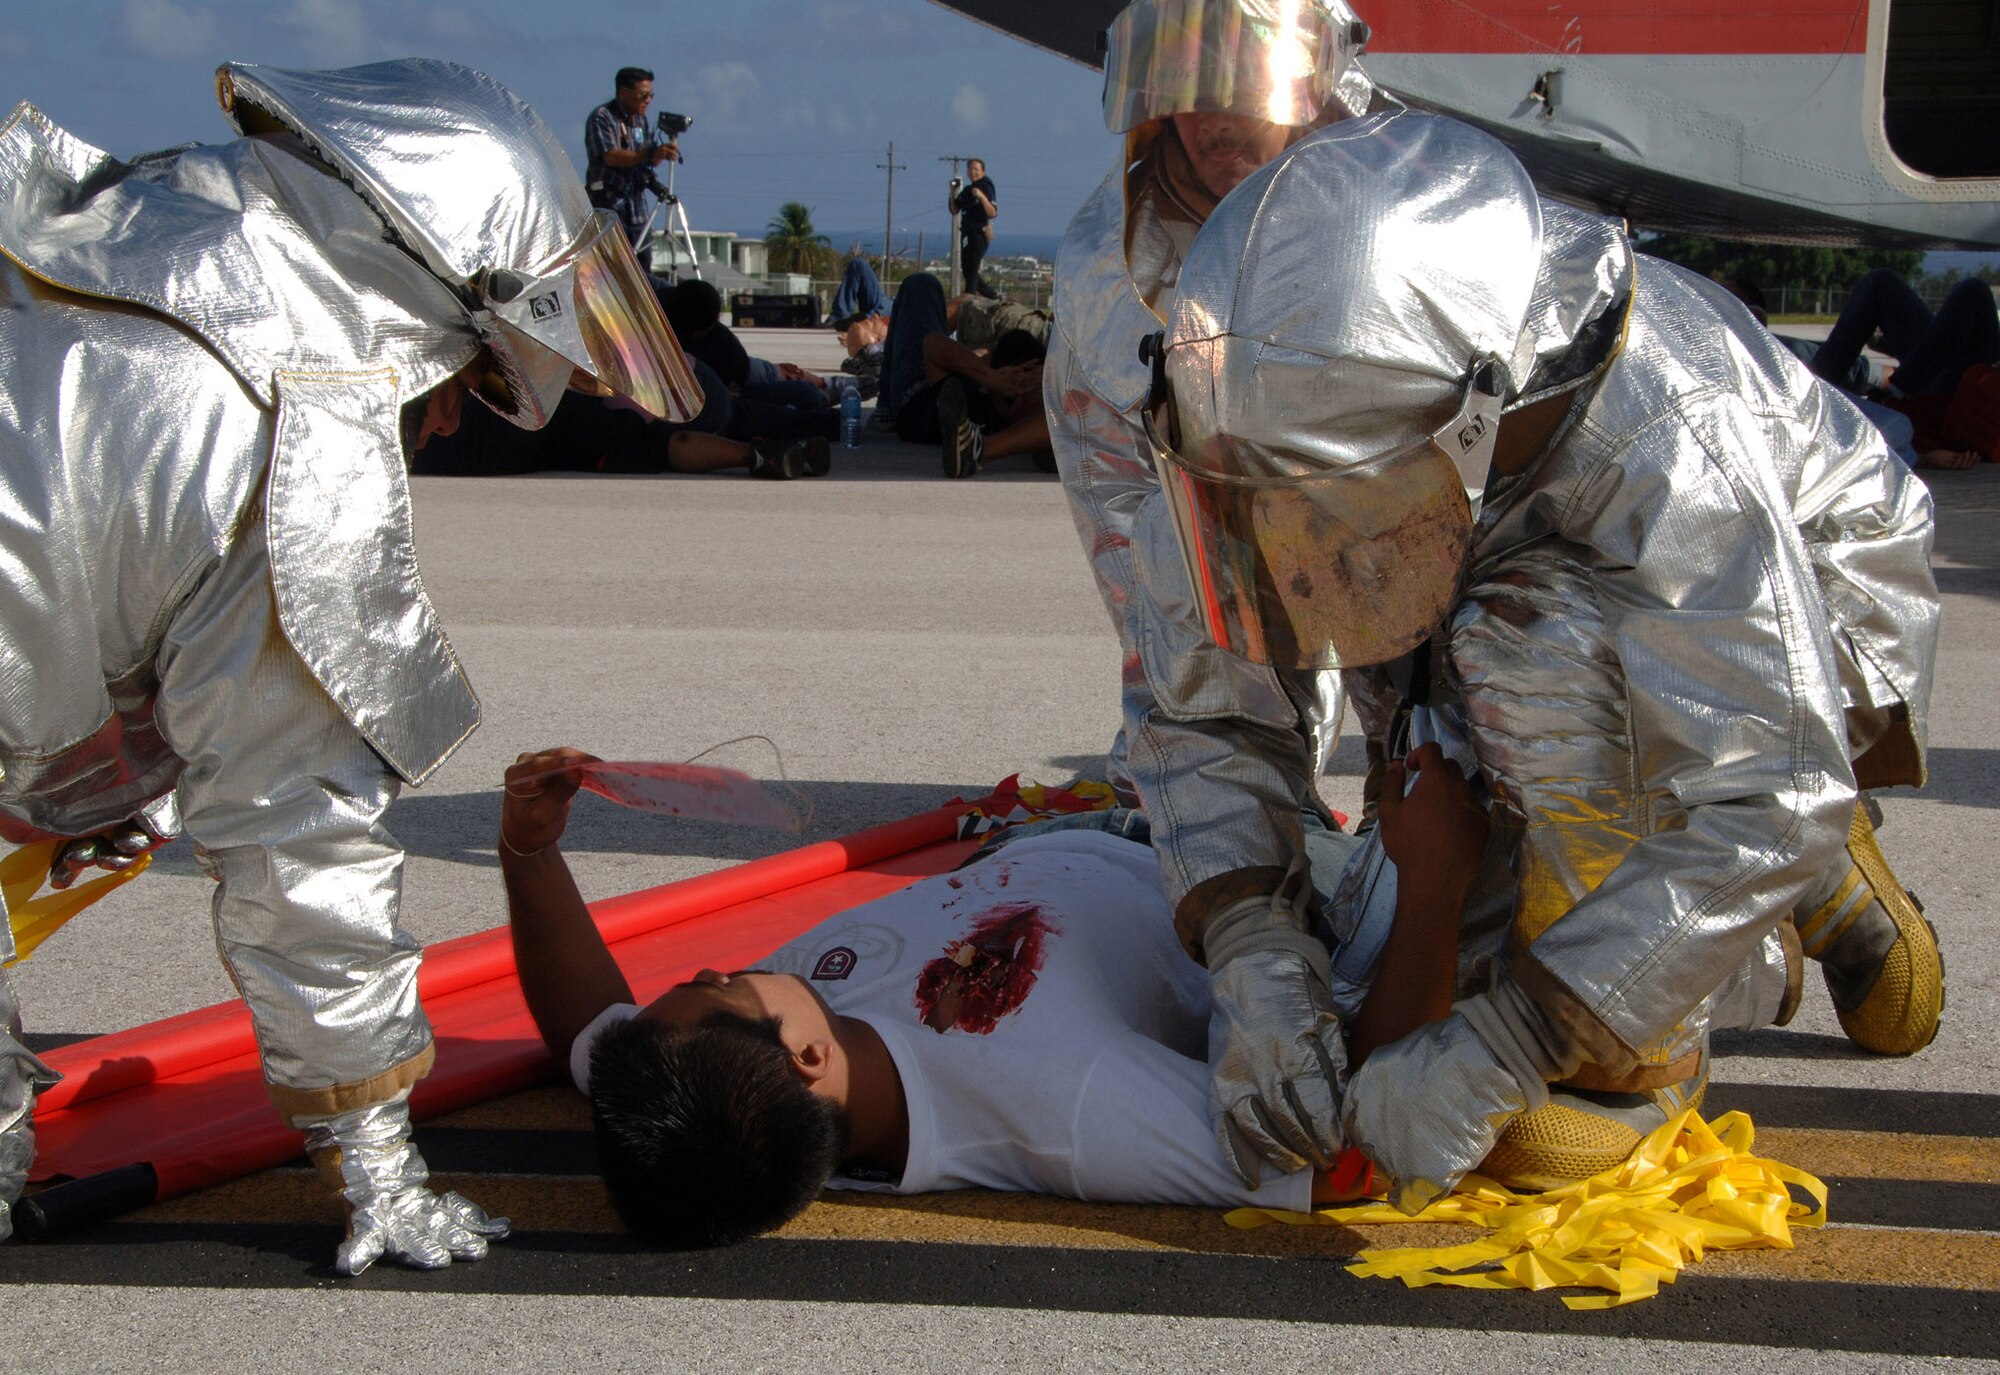 Members of the Guam Fire Department give aide to a victim at this years Full Scale Disaster Drill Exercise at Guam International Airport on June 6, 2008. The crews preformed many tasks that would essentially happen during a real plane crash. The drill started approximately 8:20 a.m. and finished around 11:00 a.m.  (U.S. Air Force photo by Airman 1st Class Courtney Witt)